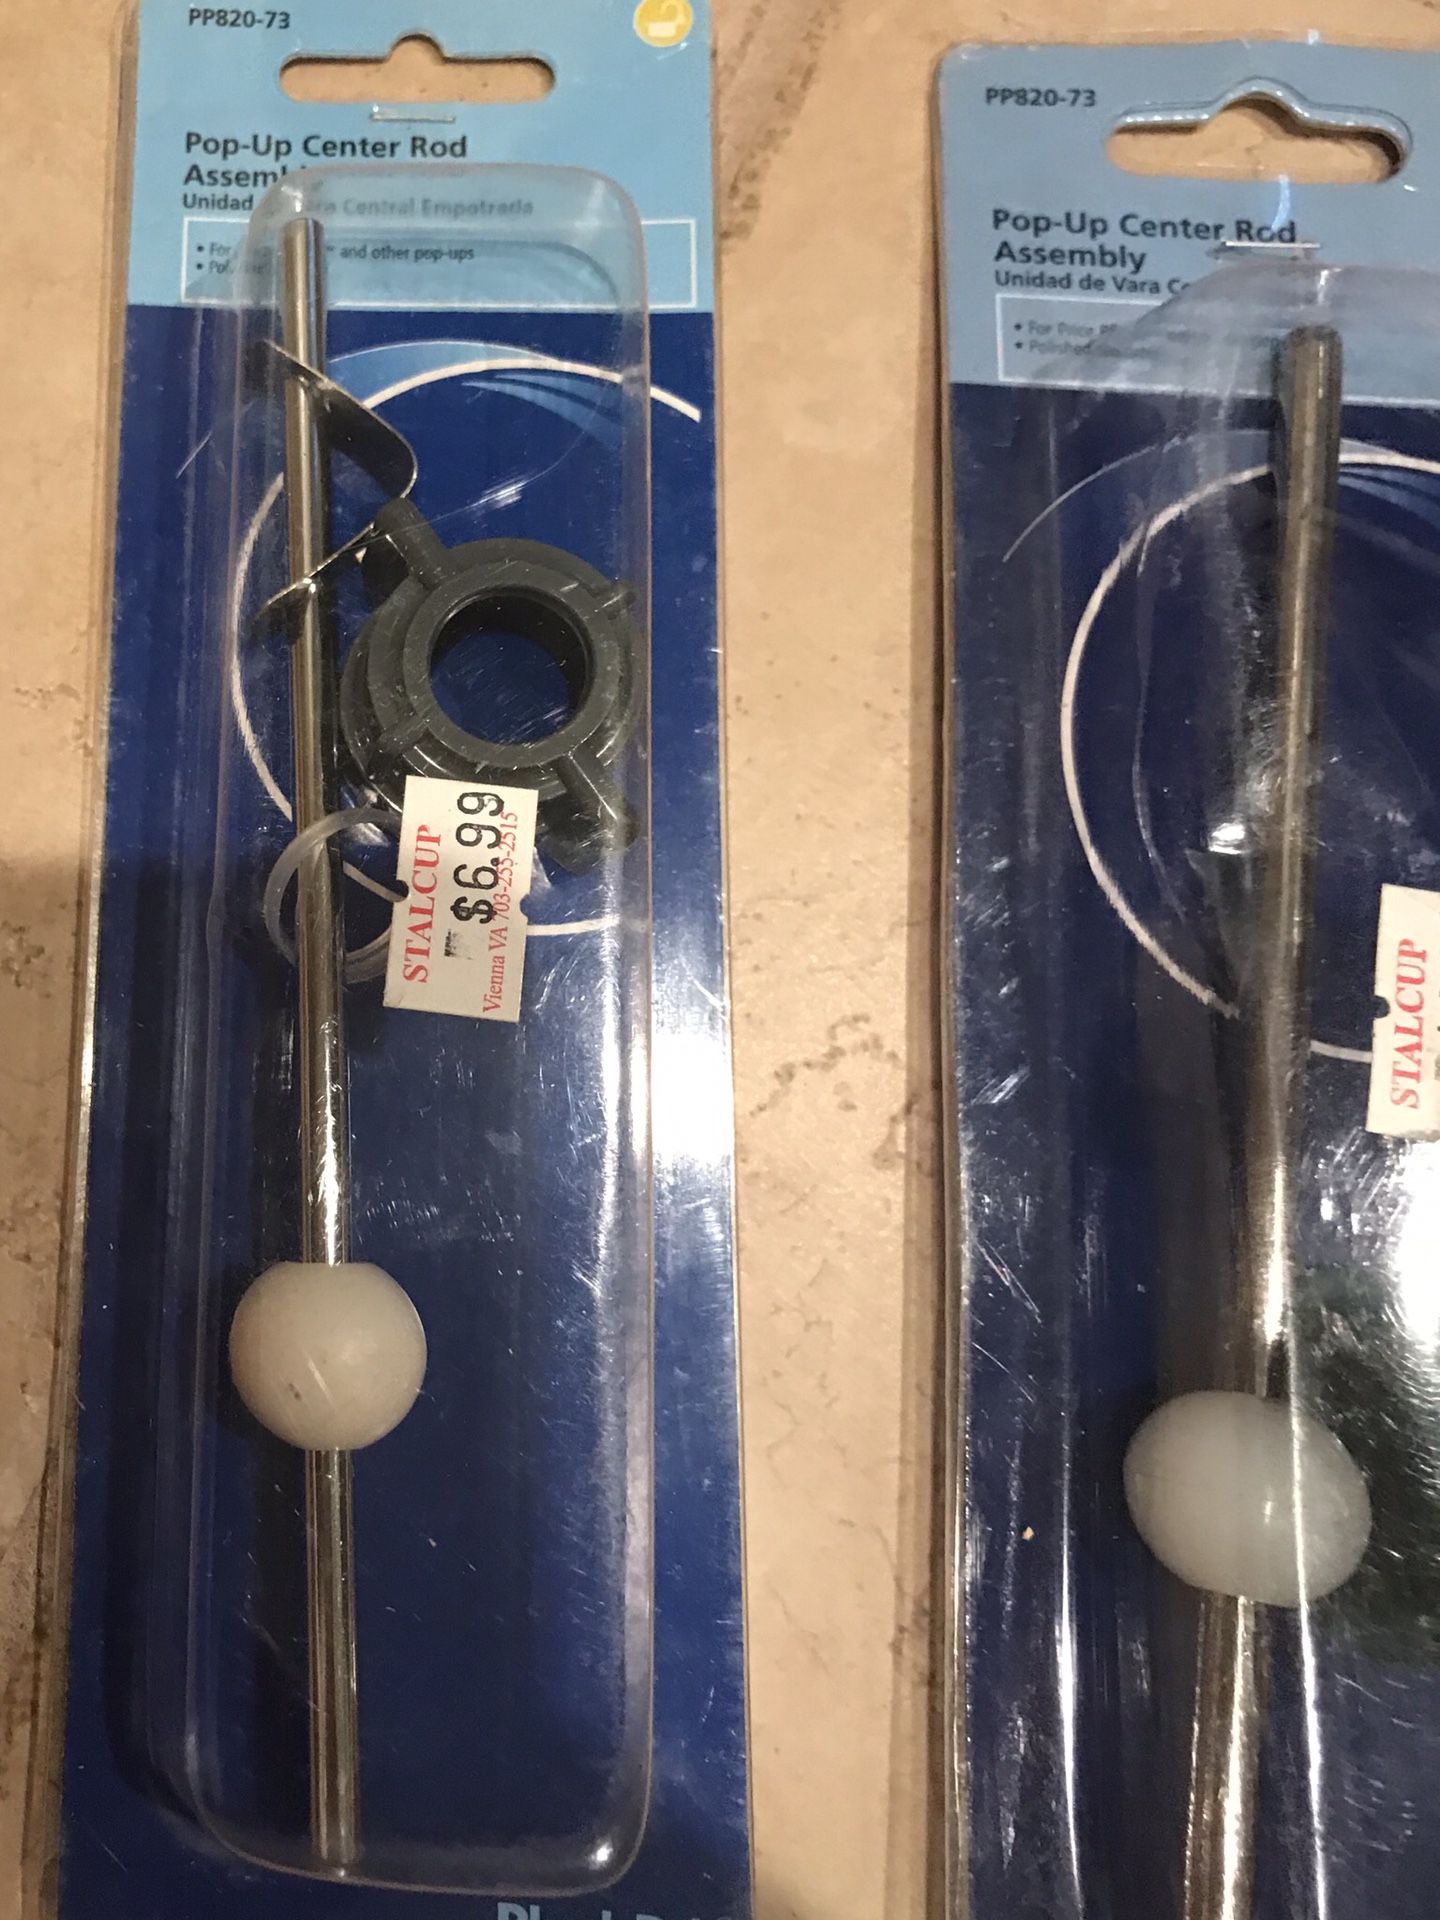 2 No Pop - Up Center Rod Assembly, PP820-73 at $7 each